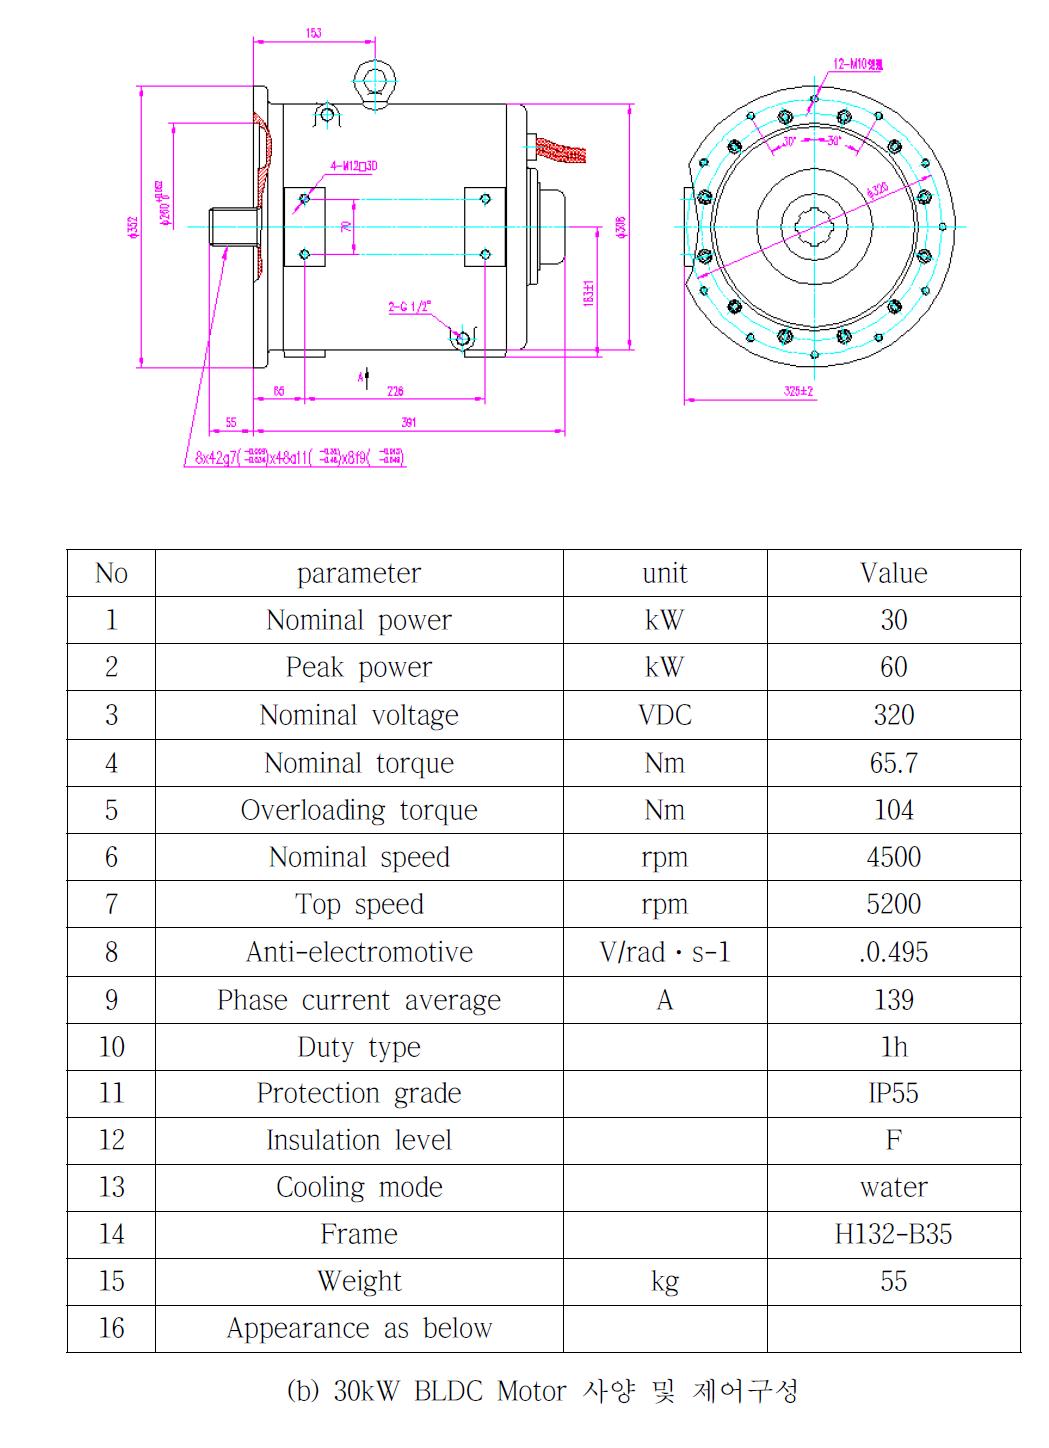 Electric Power Train용 30kW BLDC Motor